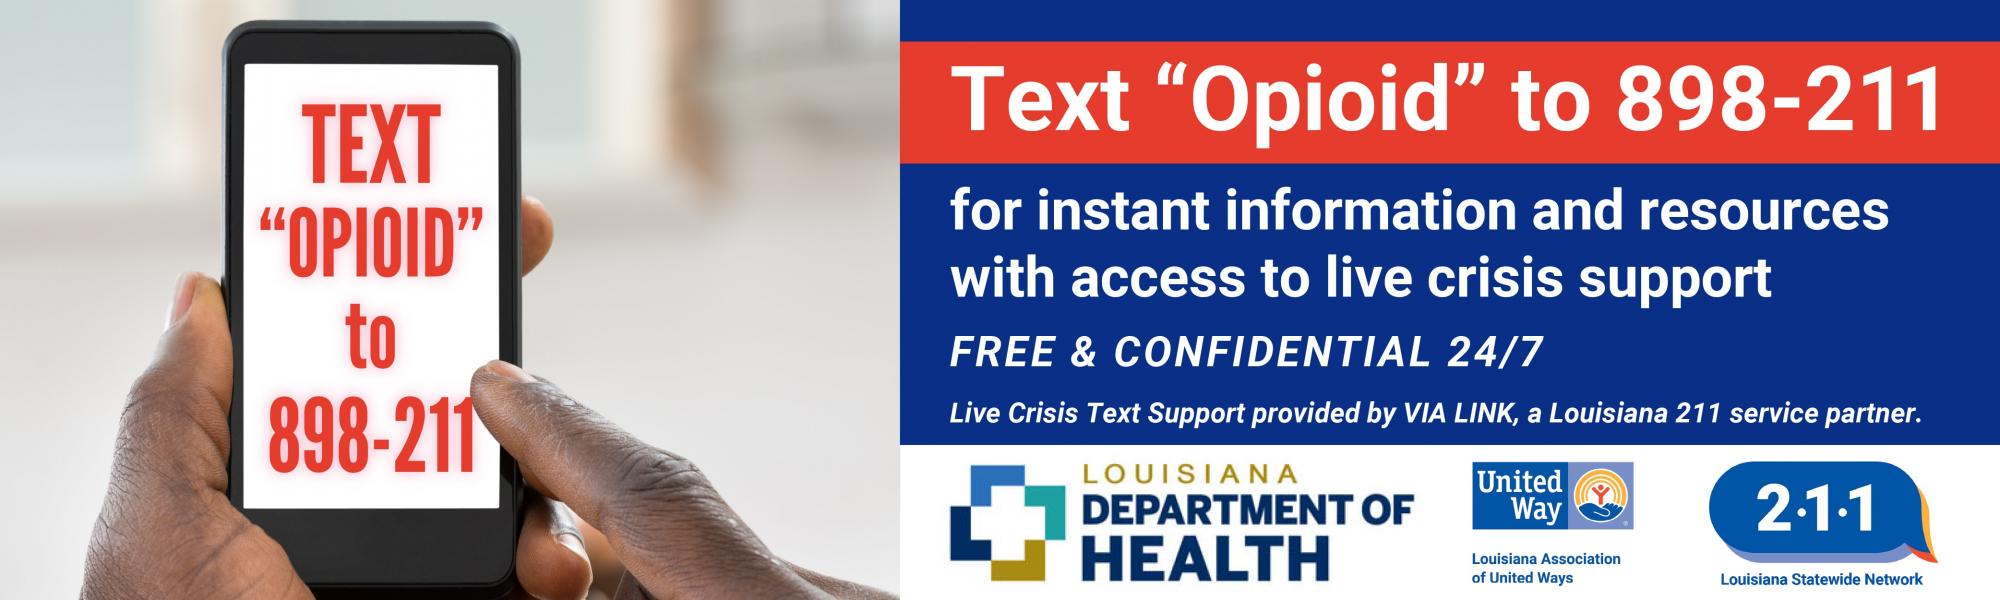 Opioid Texting Information and Support